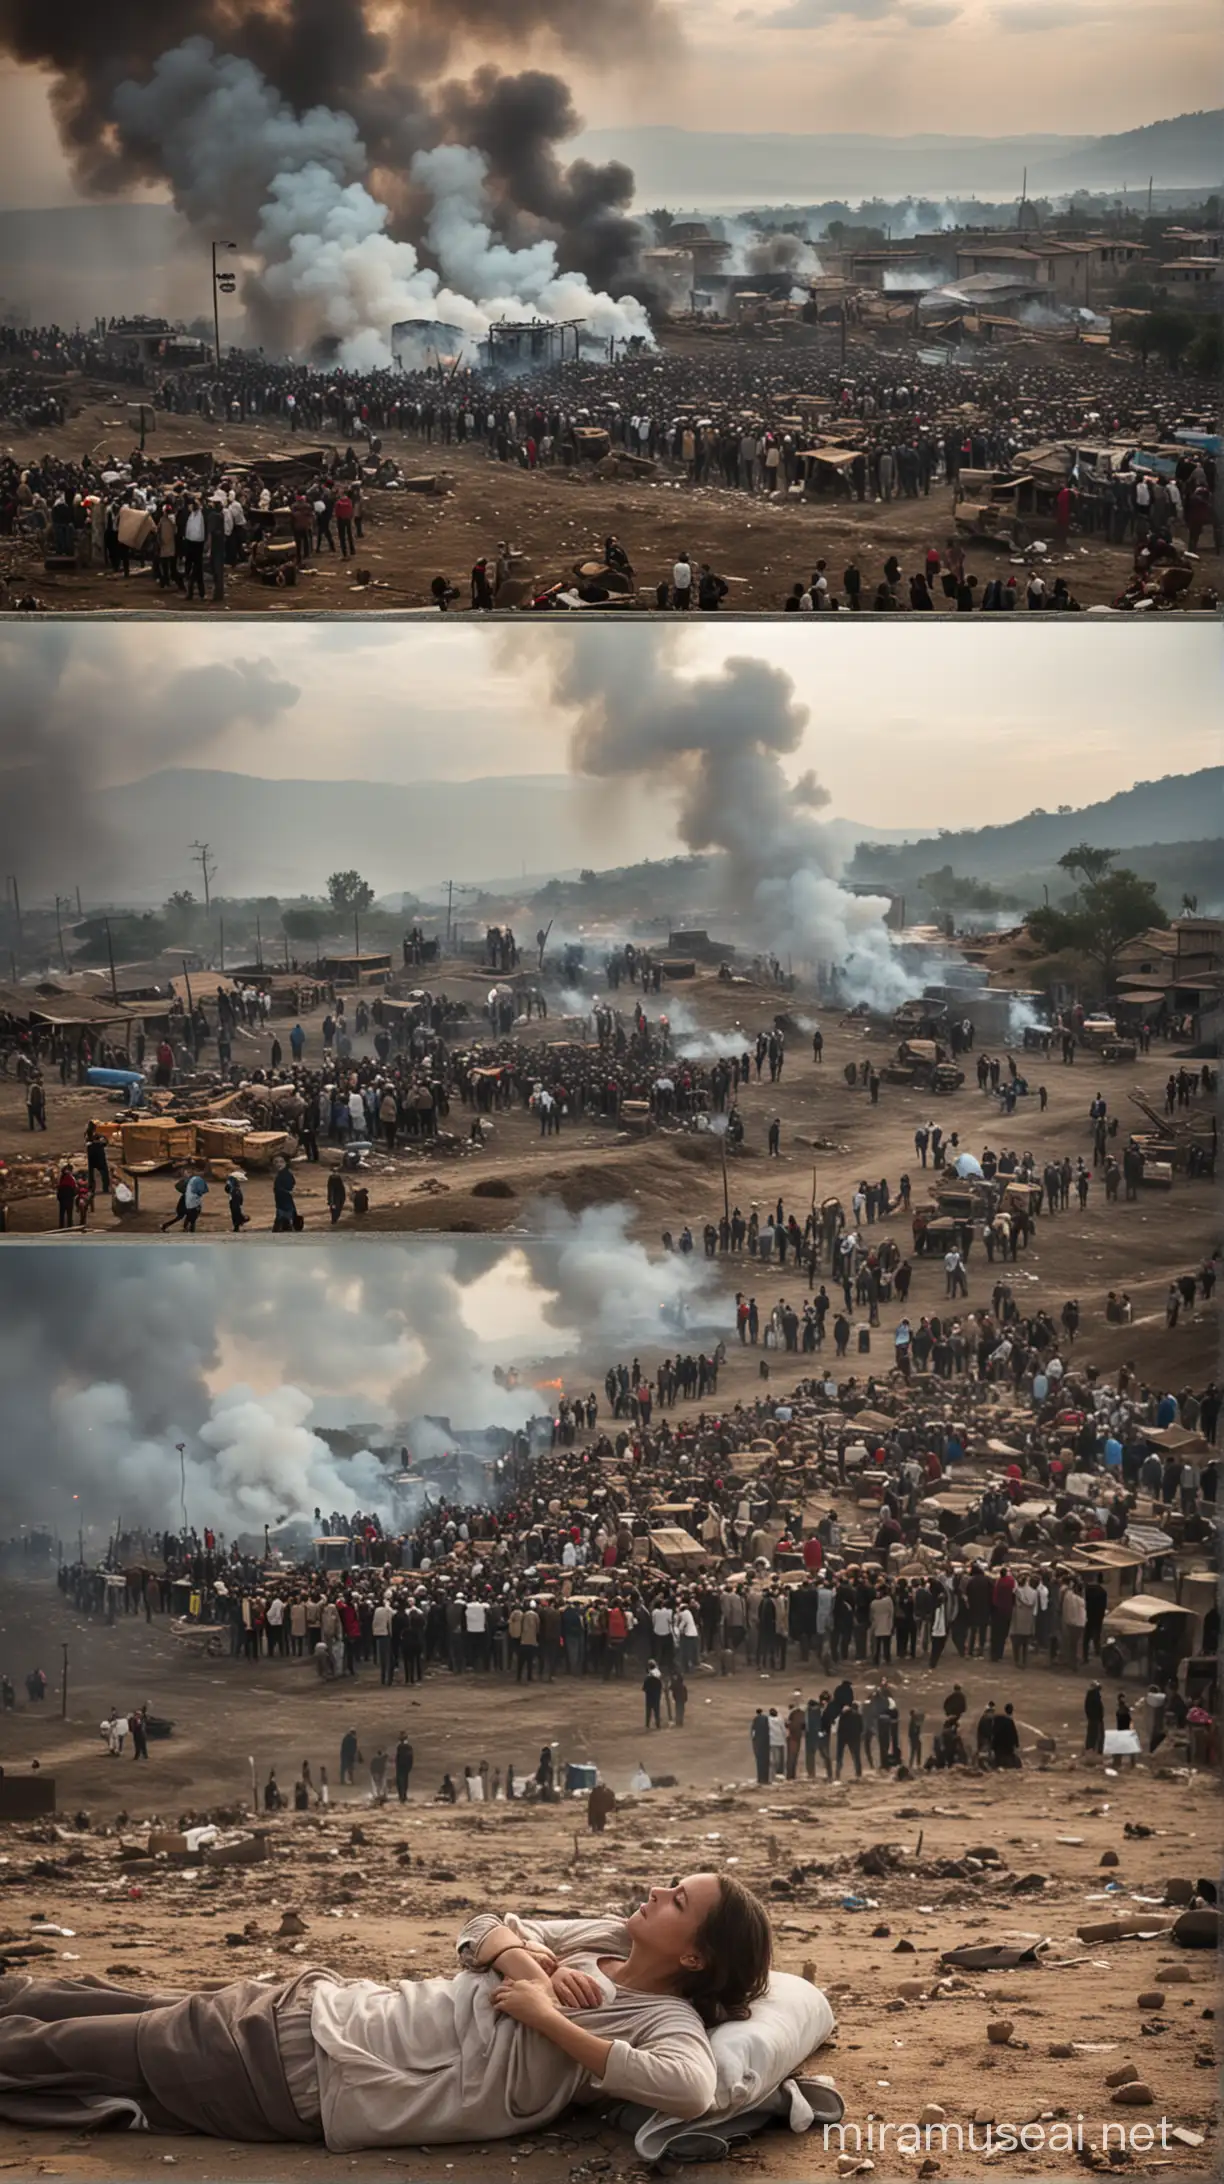 In the sixth picture, Erica is shown martyred during the most violent moment of the war in Yalova village. As she lies amidst scattered supplies, villagers and medical staff gather around her with a sense of sorrow. Smoke rises in the sky, enveloping the village with the war's destructive impact. Despite the turmoil, Erica's peaceful expression reflects the presence of loved ones and the community as she breathes her last for her homeland.

